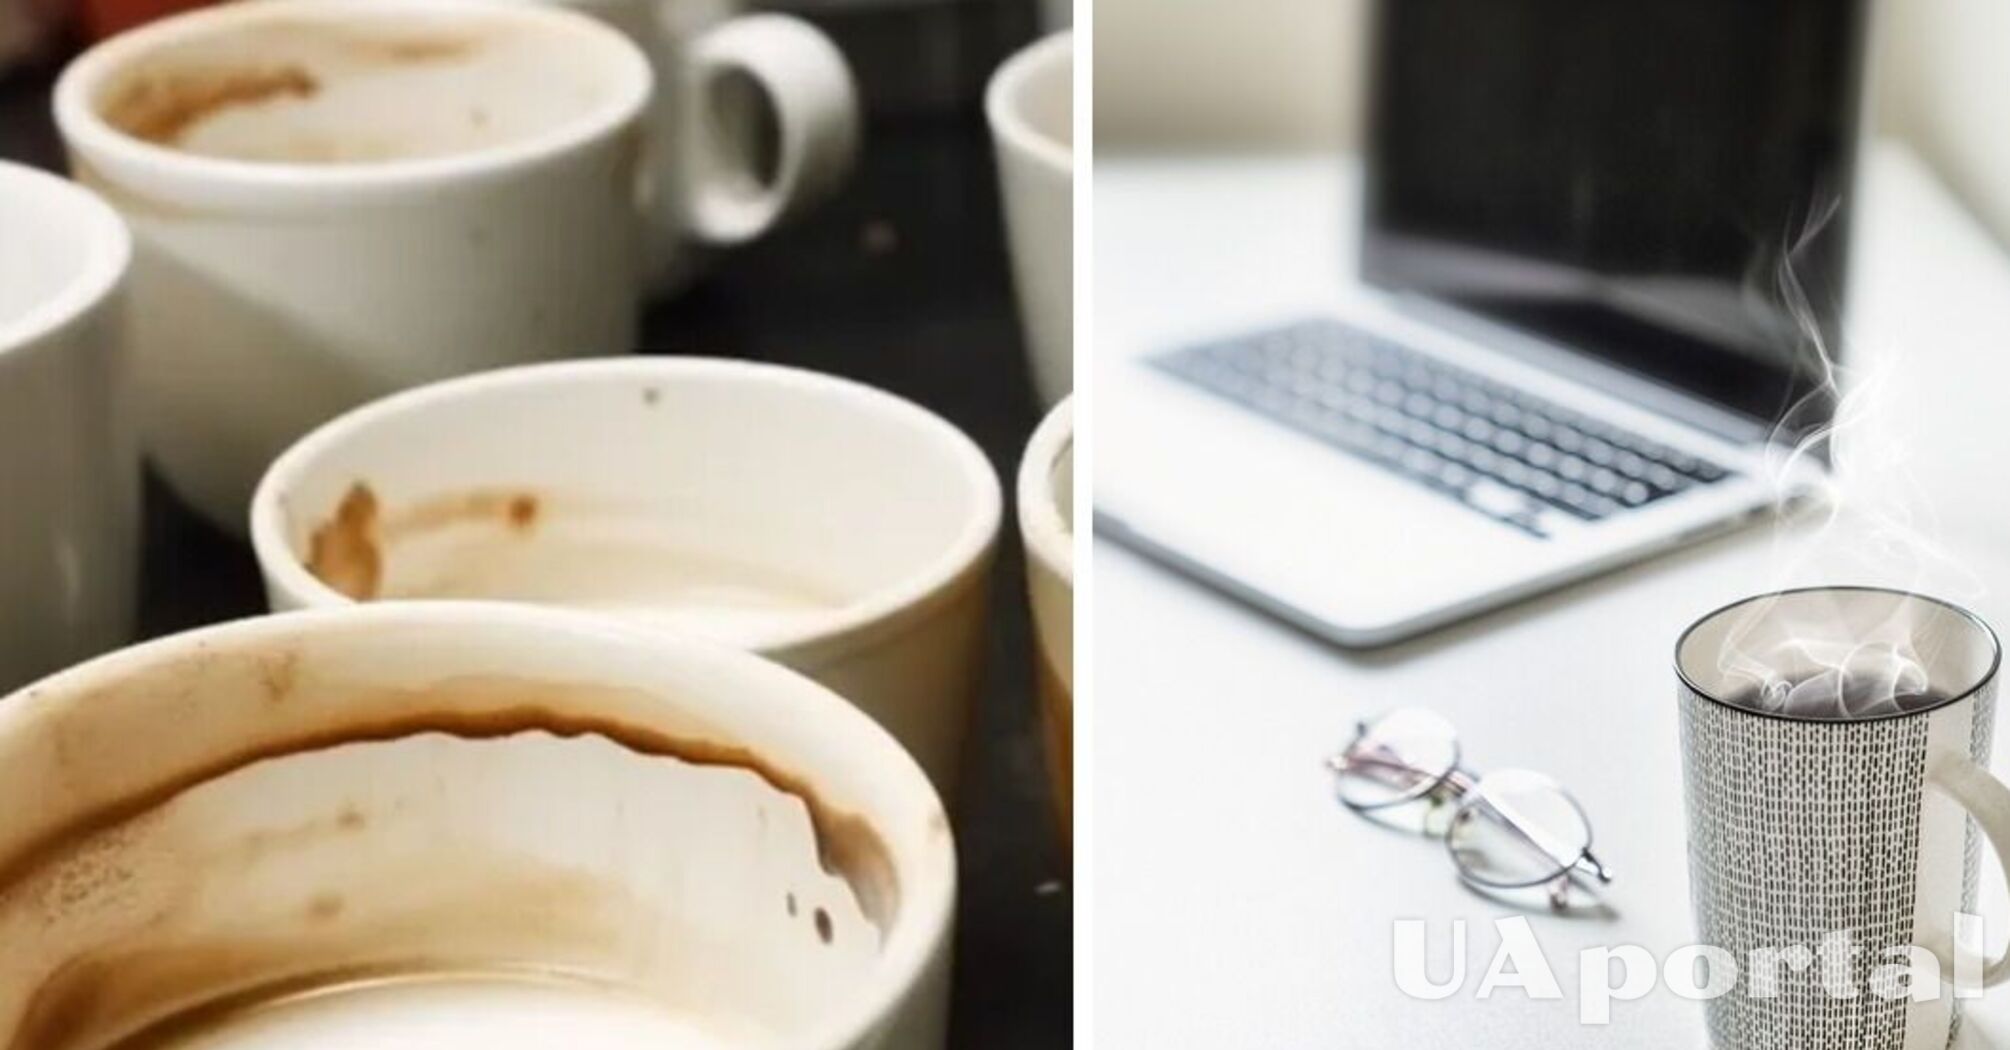 Experts tell how to remove coffee or tea stains from a cup quickly and easily